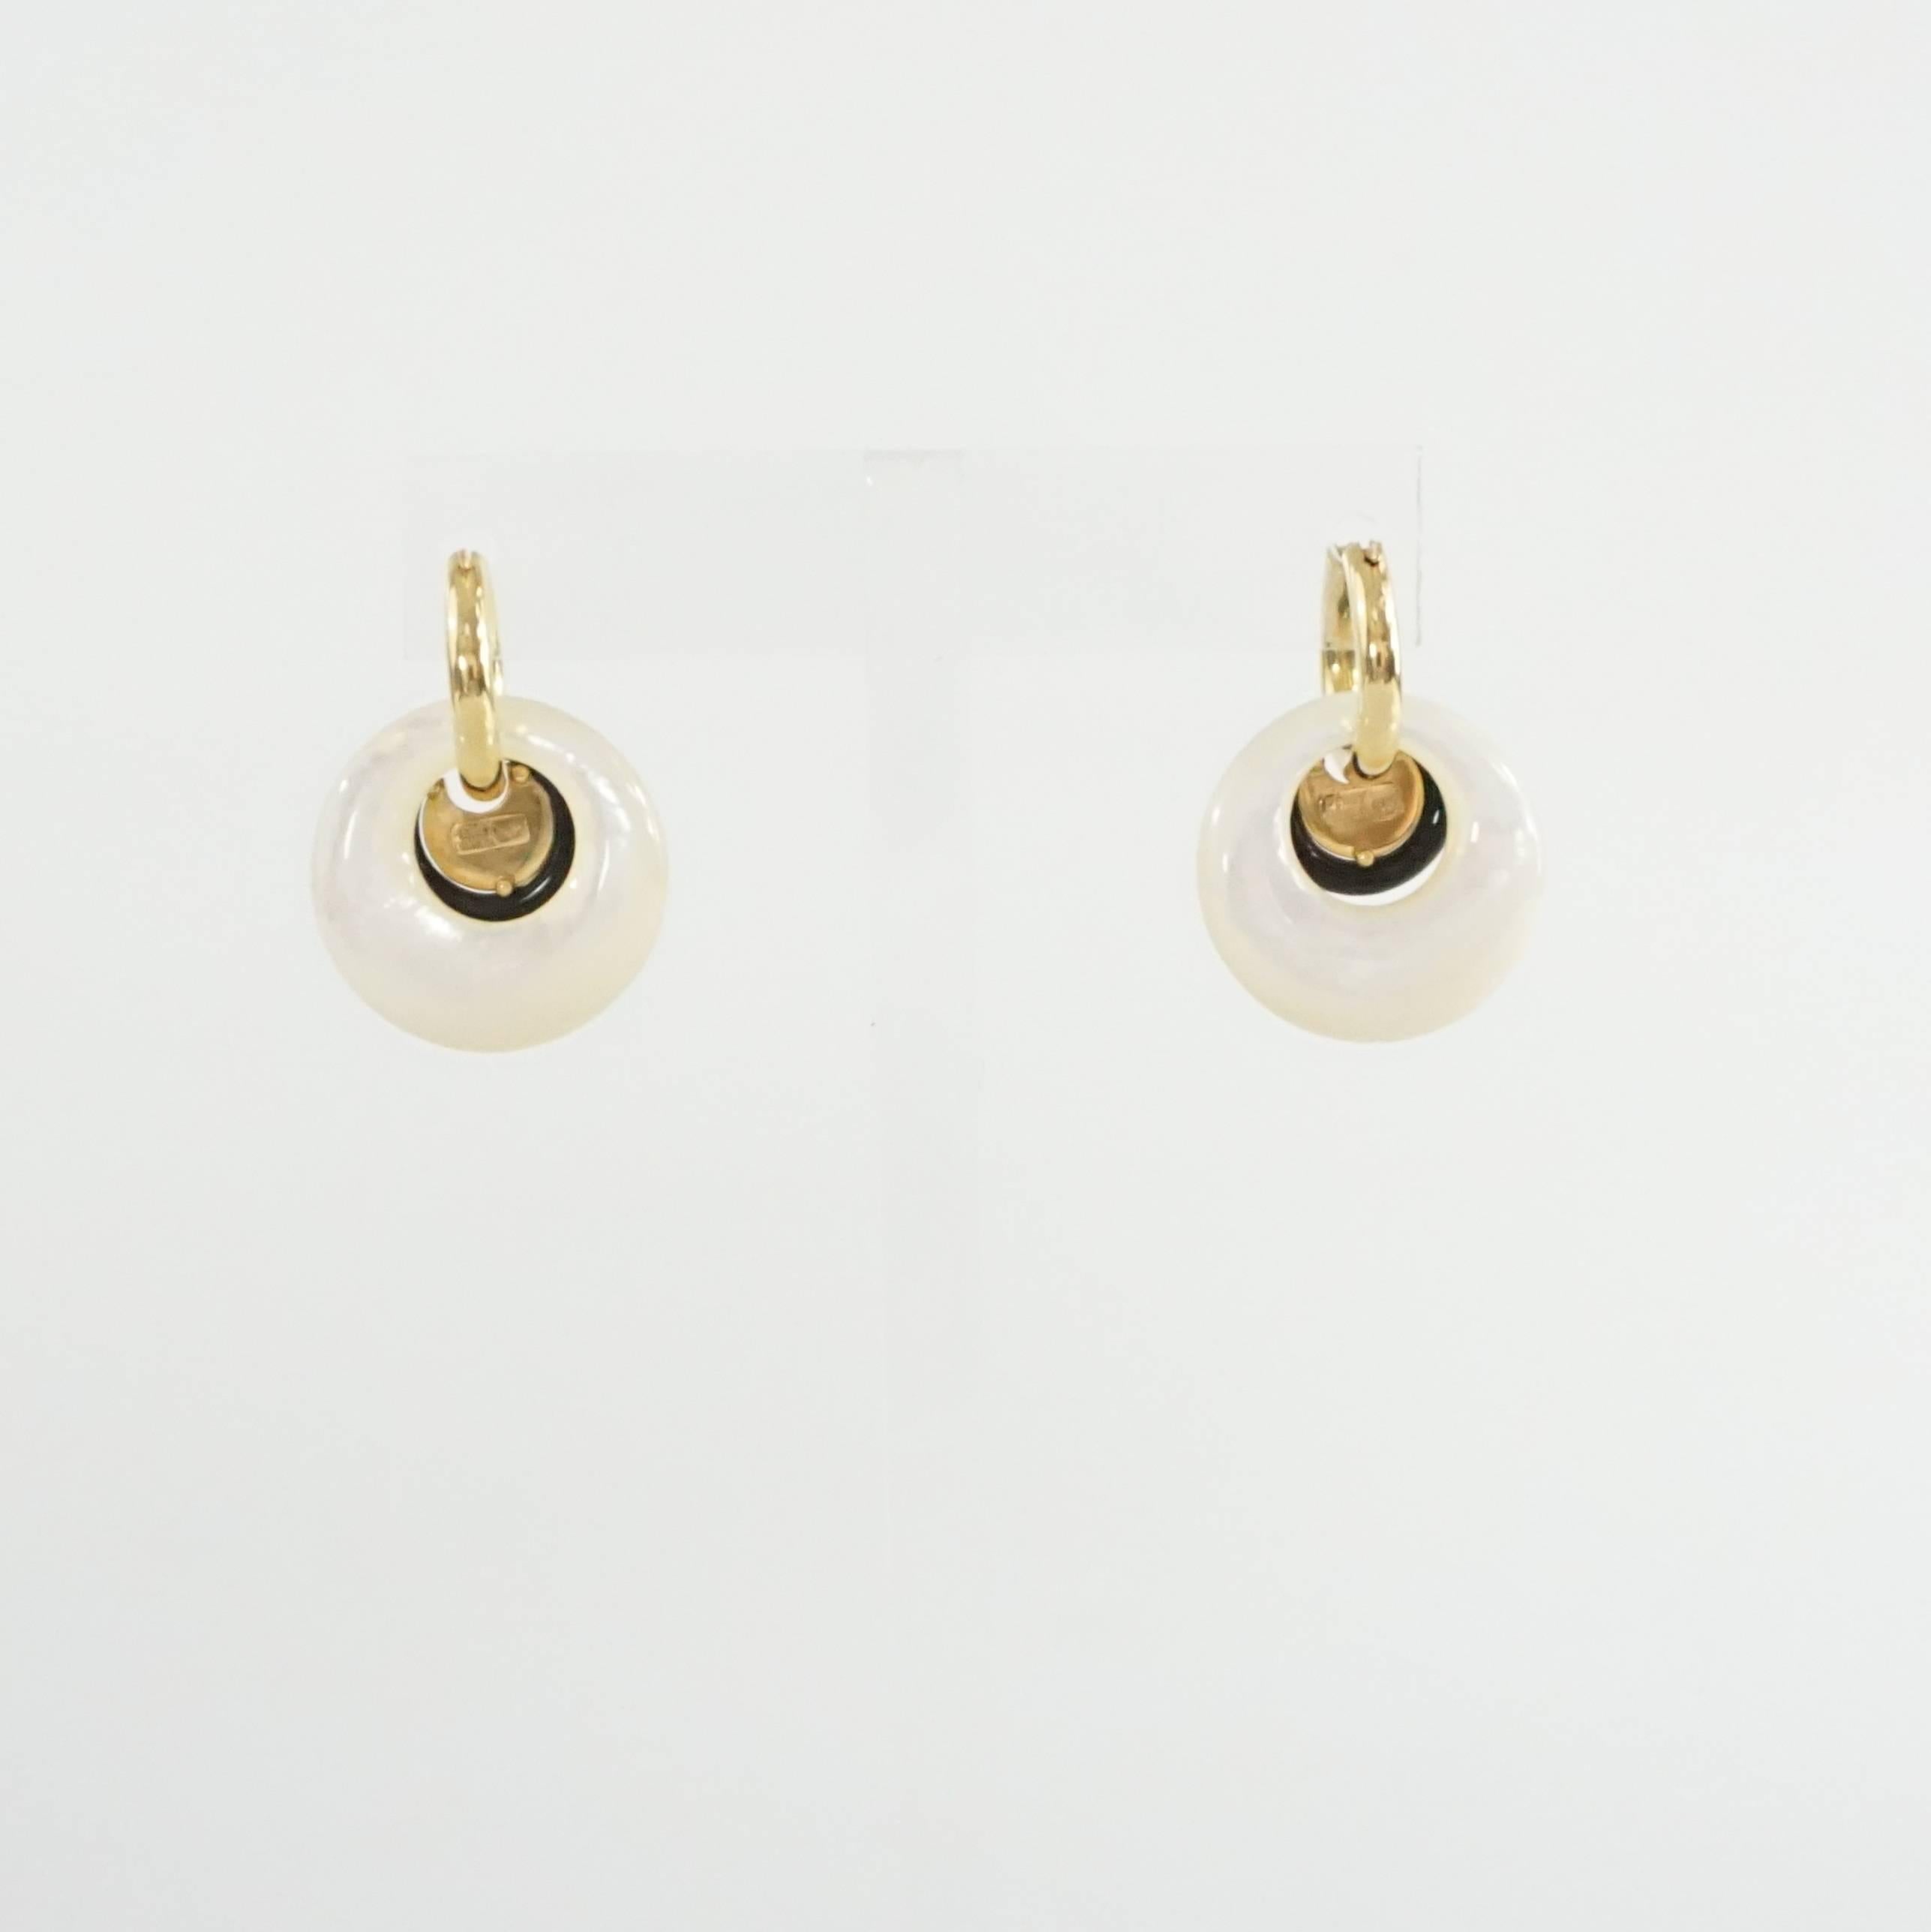 These Peggy Daven 18K gold earring hoops have 2 removable charms on. One is a mother of pearl hoop and the other is a small ebony and diamond circle. The earrings are in excellent condition.

Hoop Drop: 1.25